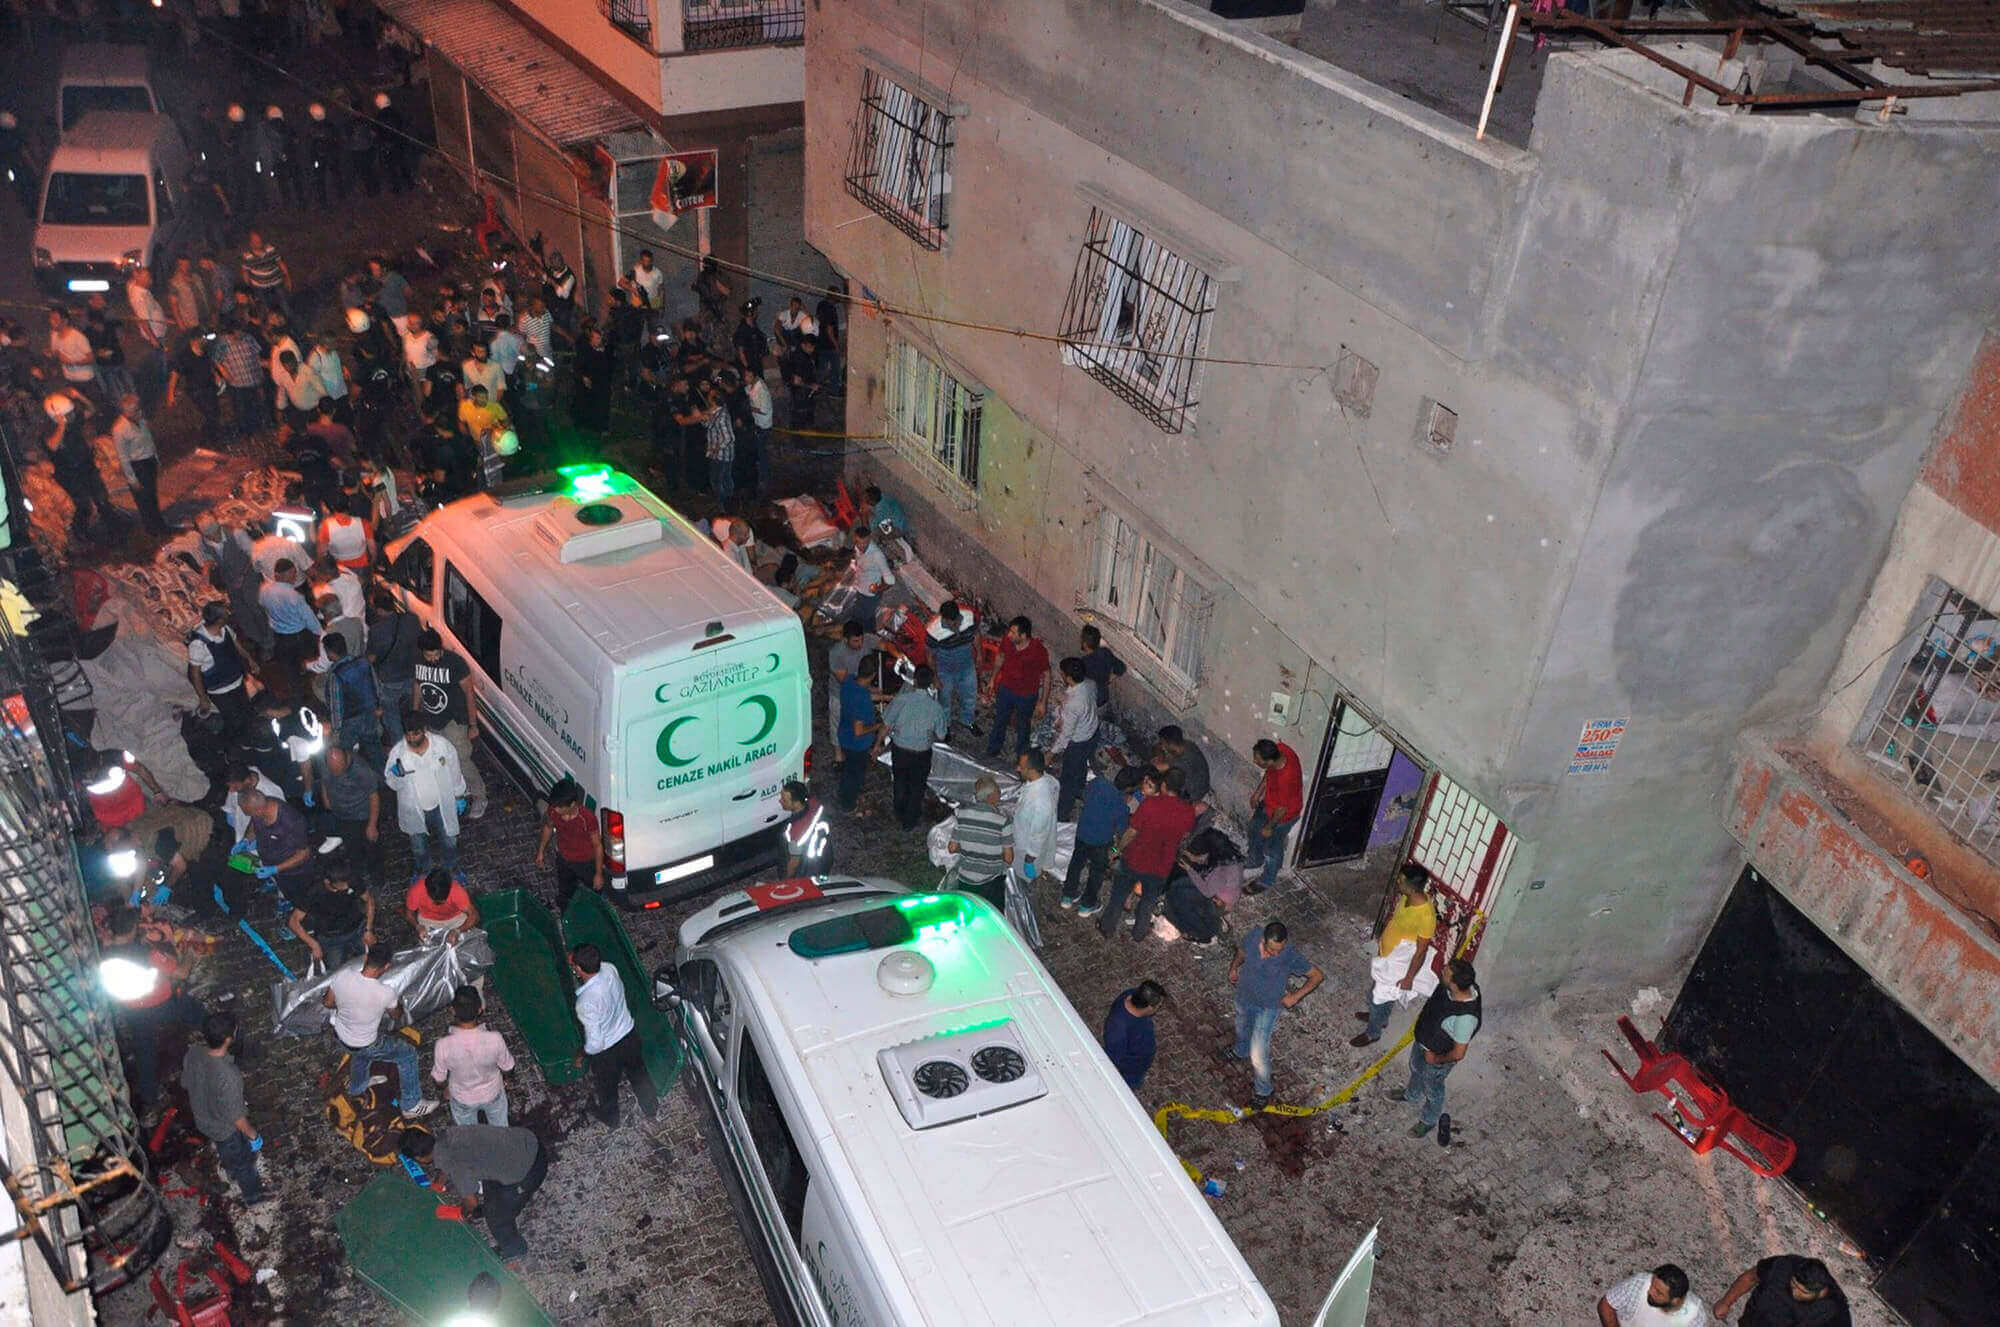 Image of people carrying dead bodies into ambulance after explosion at wedding in Turkey